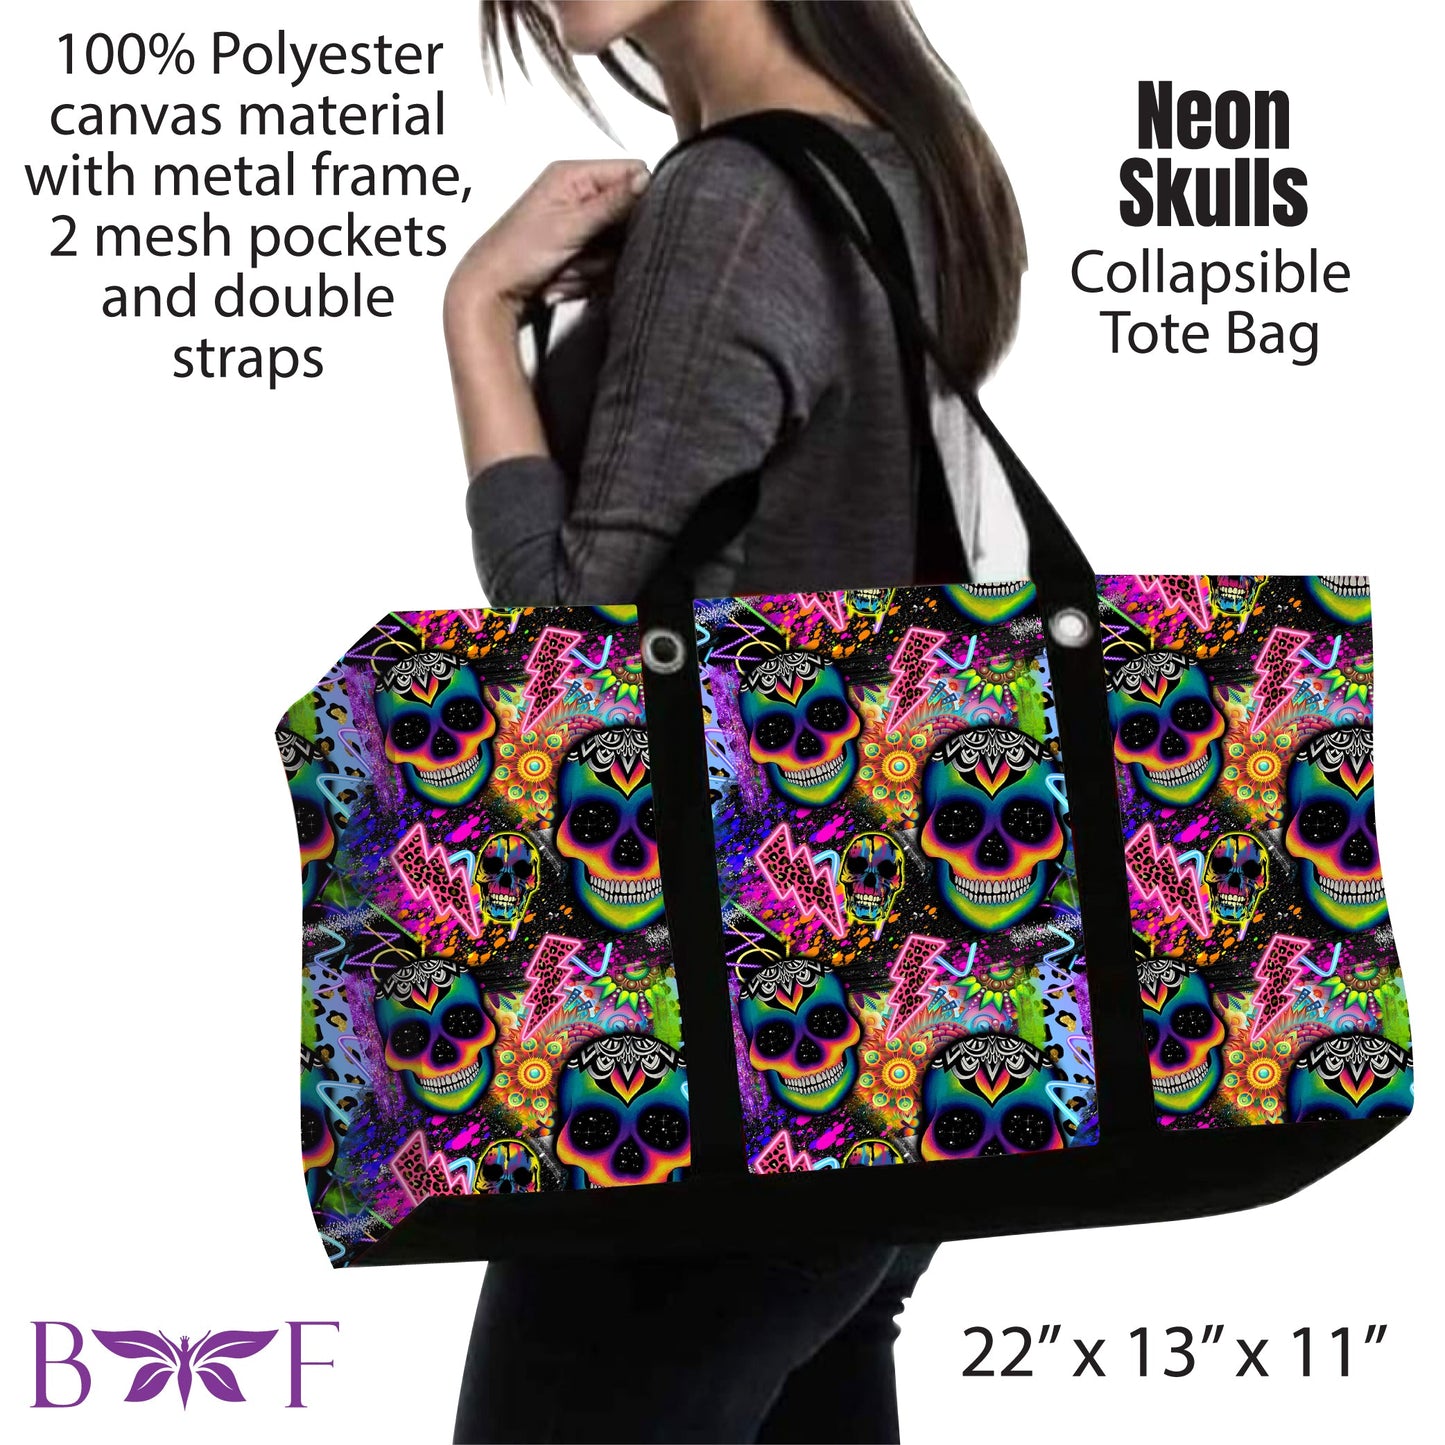 Neon Skulls Tote with 2 mesh pockets